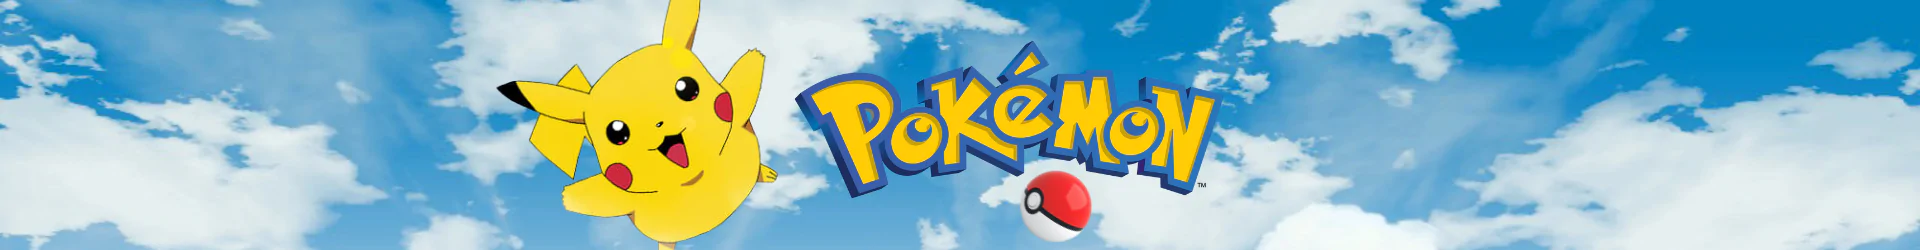 Pokemon products banner